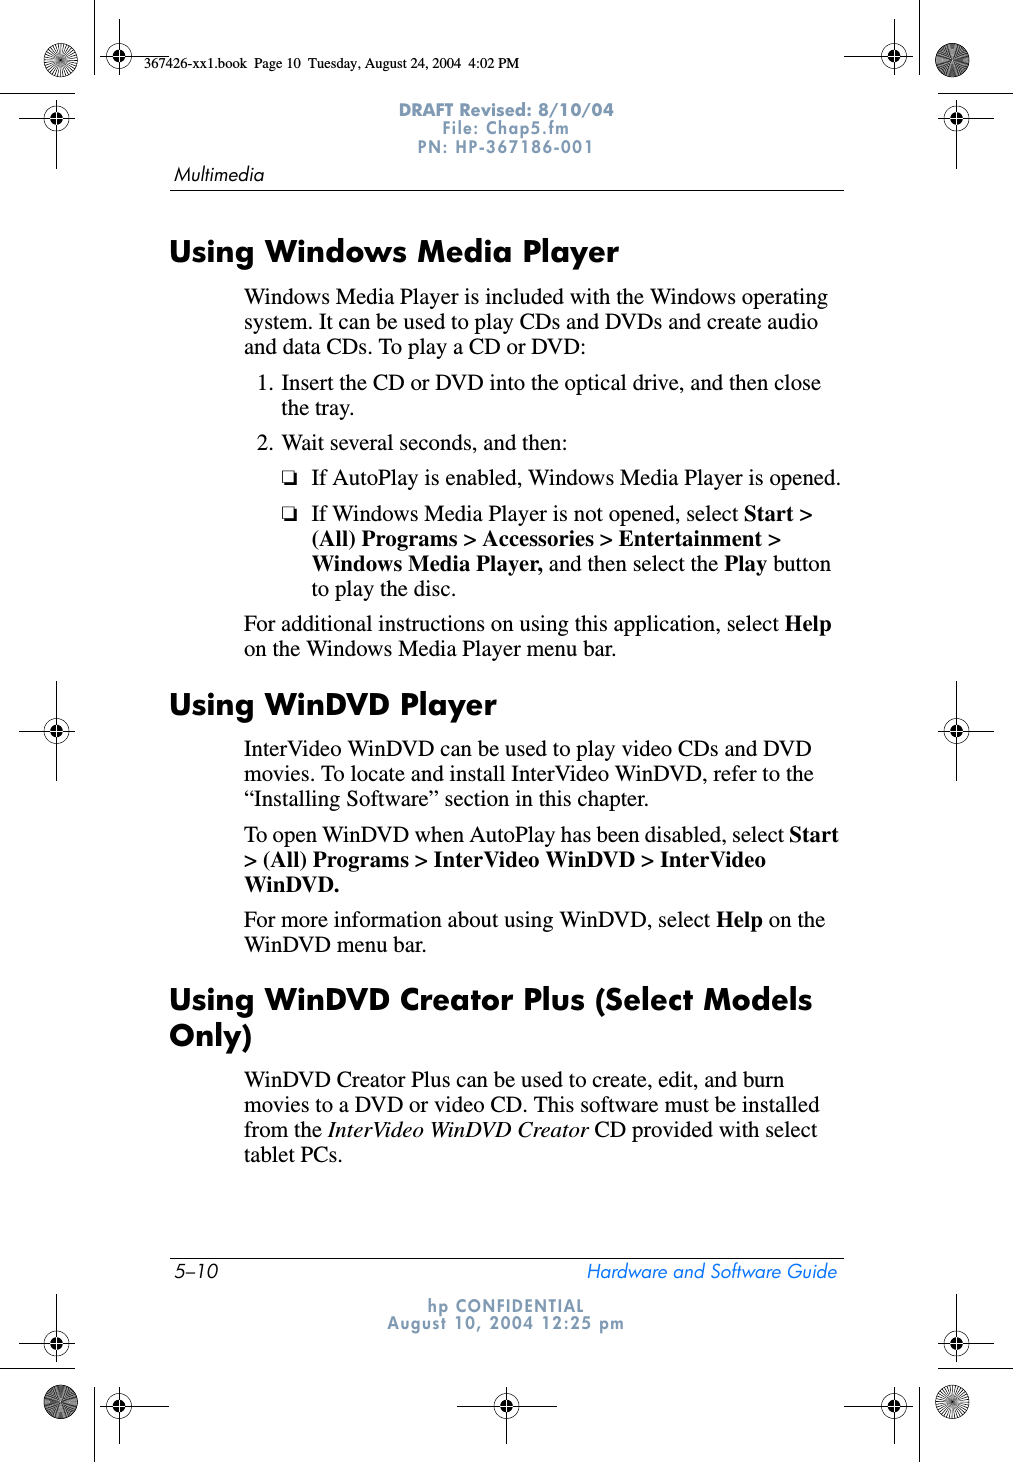 5–10 Hardware and Software GuideMultimediaDRAFT Revised: 8/10/04File: Chap5.fm PN: HP-367186-001 hp CONFIDENTIALAugust 10, 2004 12:25 pmUsing Windows Media PlayerWindows Media Player is included with the Windows operating system. It can be used to play CDs and DVDs and create audio and data CDs. To play a CD or DVD:1. Insert the CD or DVD into the optical drive, and then close the tray. 2. Wait several seconds, and then:❏If AutoPlay is enabled, Windows Media Player is opened.❏If Windows Media Player is not opened, select Start &gt; (All) Programs &gt; Accessories &gt; Entertainment &gt; Windows Media Player, and then select the Play button to play the disc.For additional instructions on using this application, select Help on the Windows Media Player menu bar.Using WinDVD PlayerInterVideo WinDVD can be used to play video CDs and DVD movies. To locate and install InterVideo WinDVD, refer to the “Installing Software” section in this chapter.To open WinDVD when AutoPlay has been disabled, select Start &gt; (All) Programs &gt; InterVideo WinDVD &gt; InterVideo WinDVD.For more information about using WinDVD, select Help on the WinDVD menu bar.Using WinDVD Creator Plus (Select Models Only)WinDVD Creator Plus can be used to create, edit, and burn movies to a DVD or video CD. This software must be installed from the InterVideo WinDVD Creator CD provided with select tablet PCs.367426-xx1.book  Page 10  Tuesday, August 24, 2004  4:02 PM